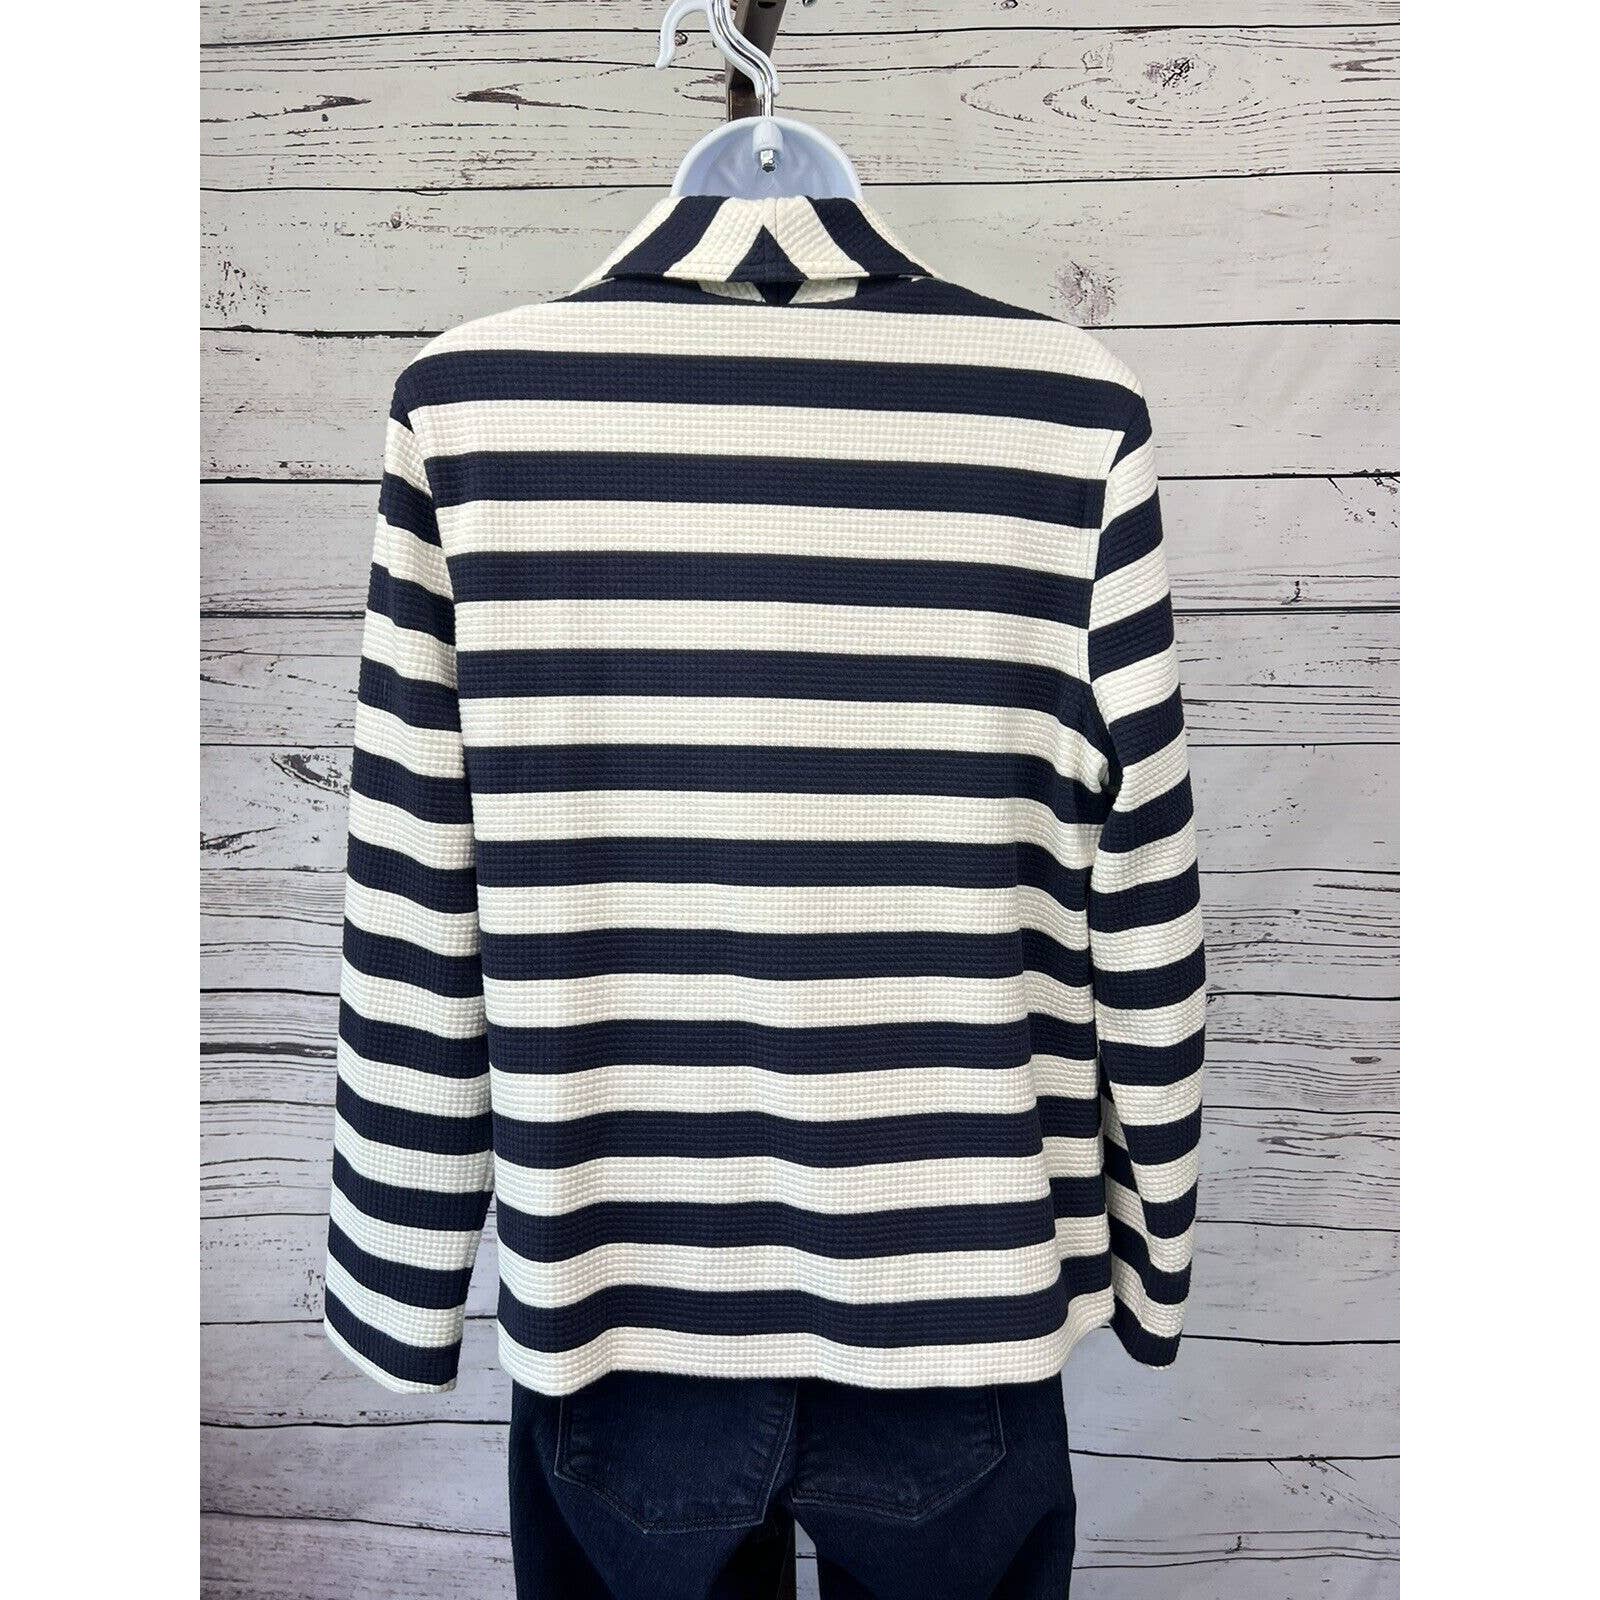 T by Talbots Jacket Womens Large Navy Blue White Stripe Casual Nautical Zip